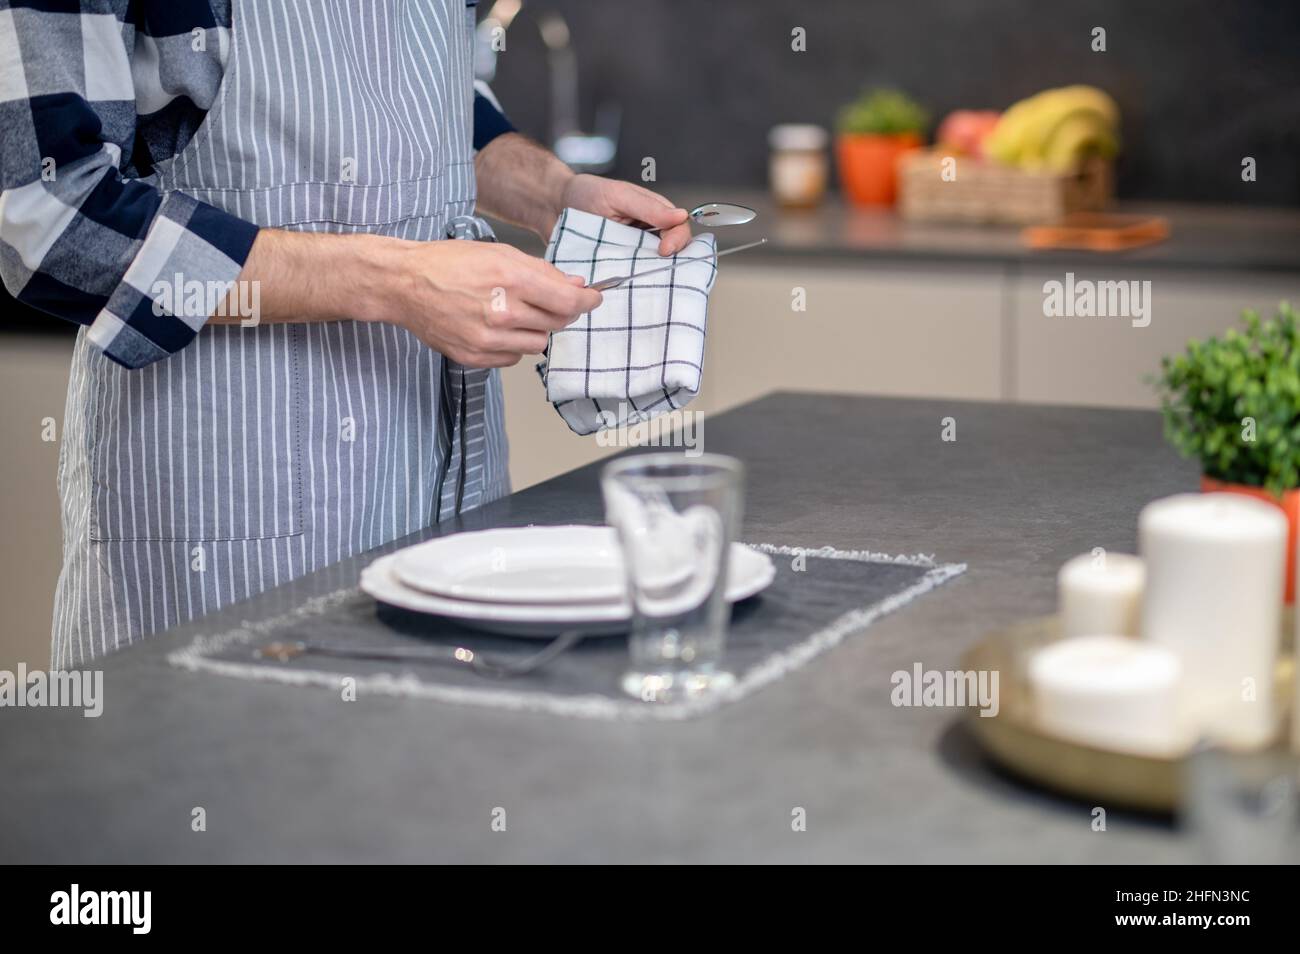 Male hands wiping knife with napkin Stock Photo